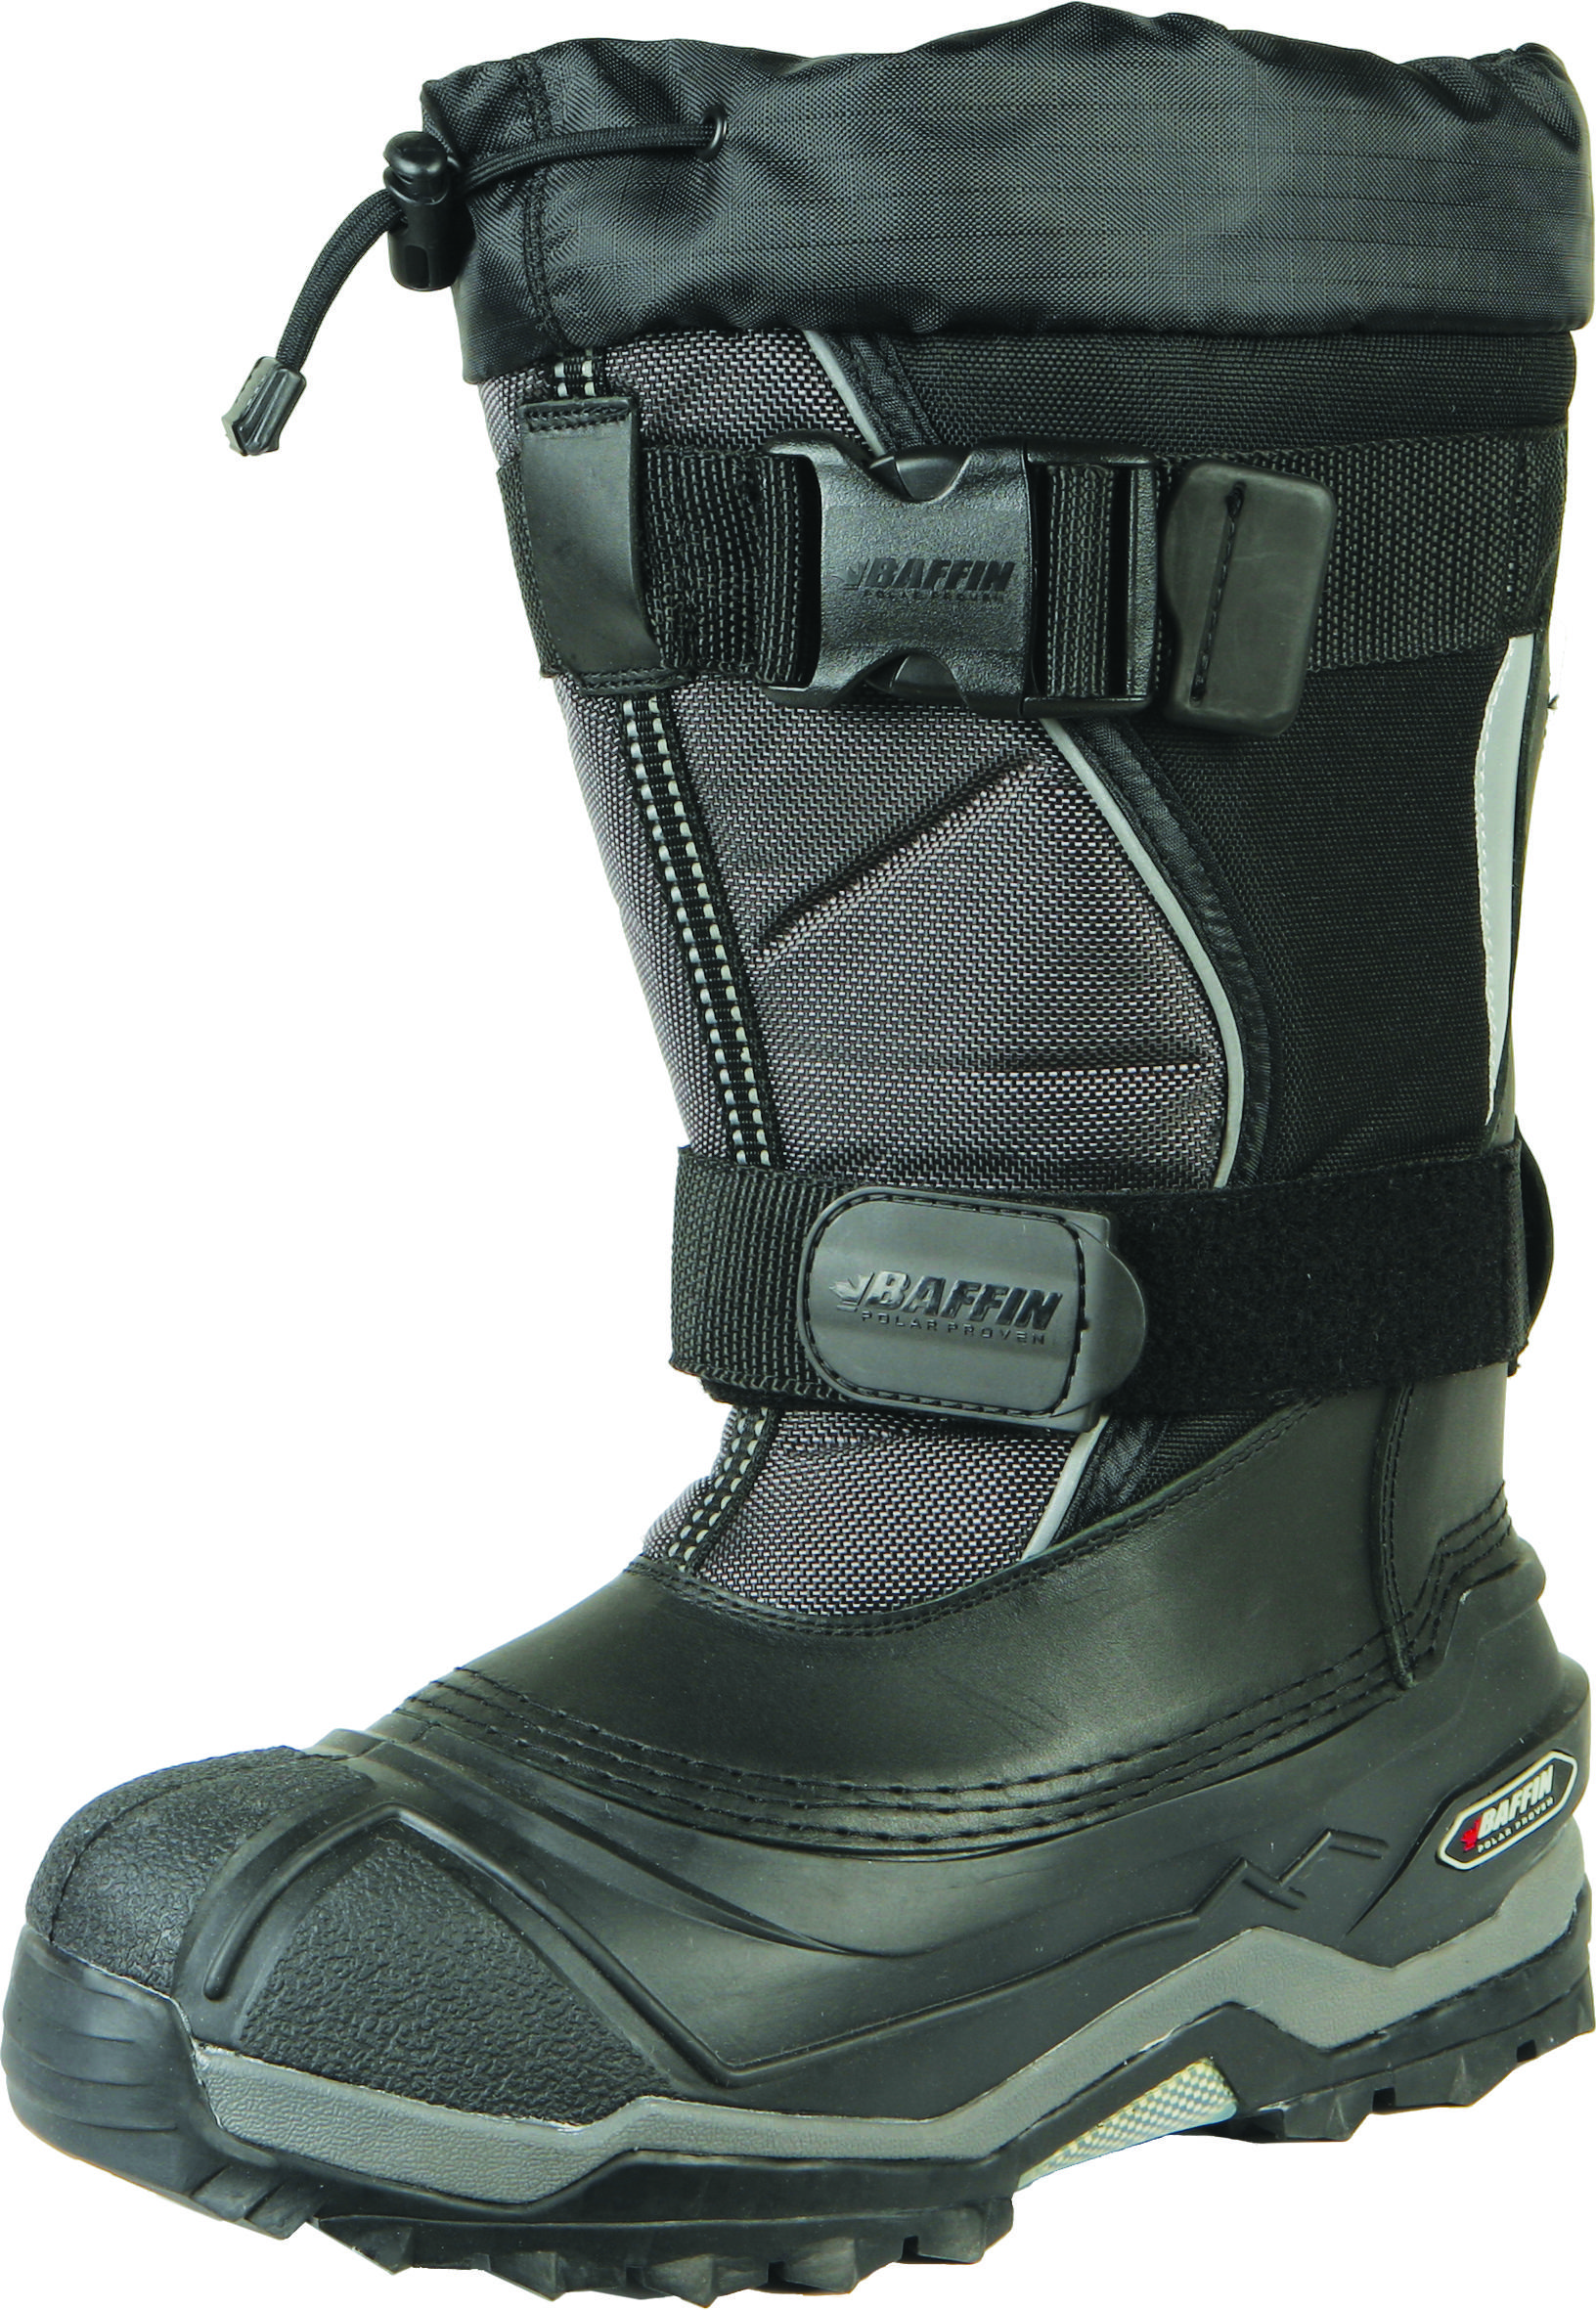 Selkirk Boots Black US 08 - Click Image to Close